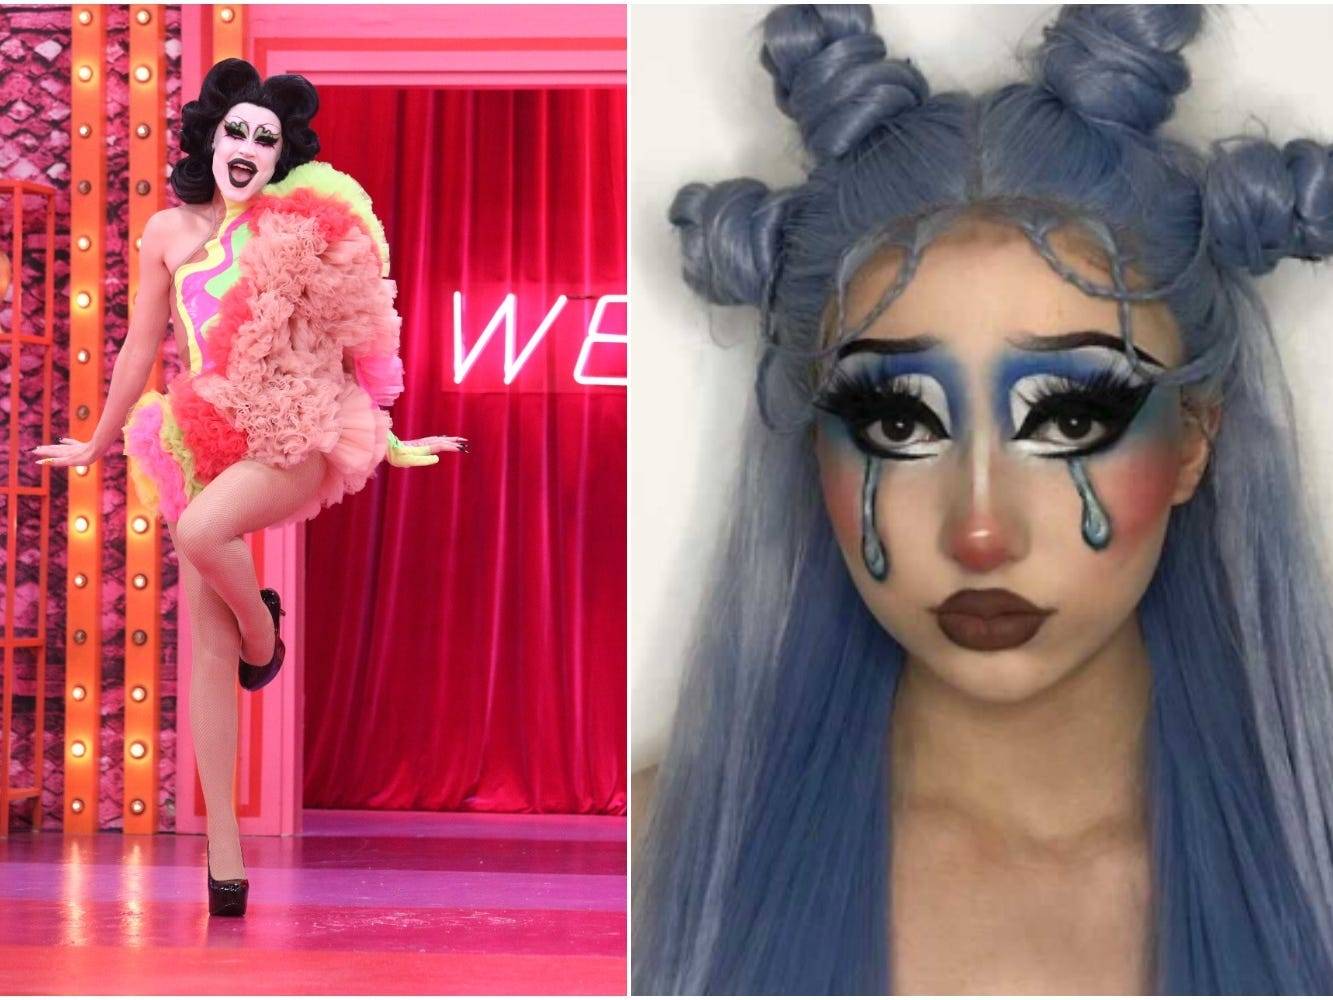 Drag queens, including the groundbreaking Gottmik, explained the